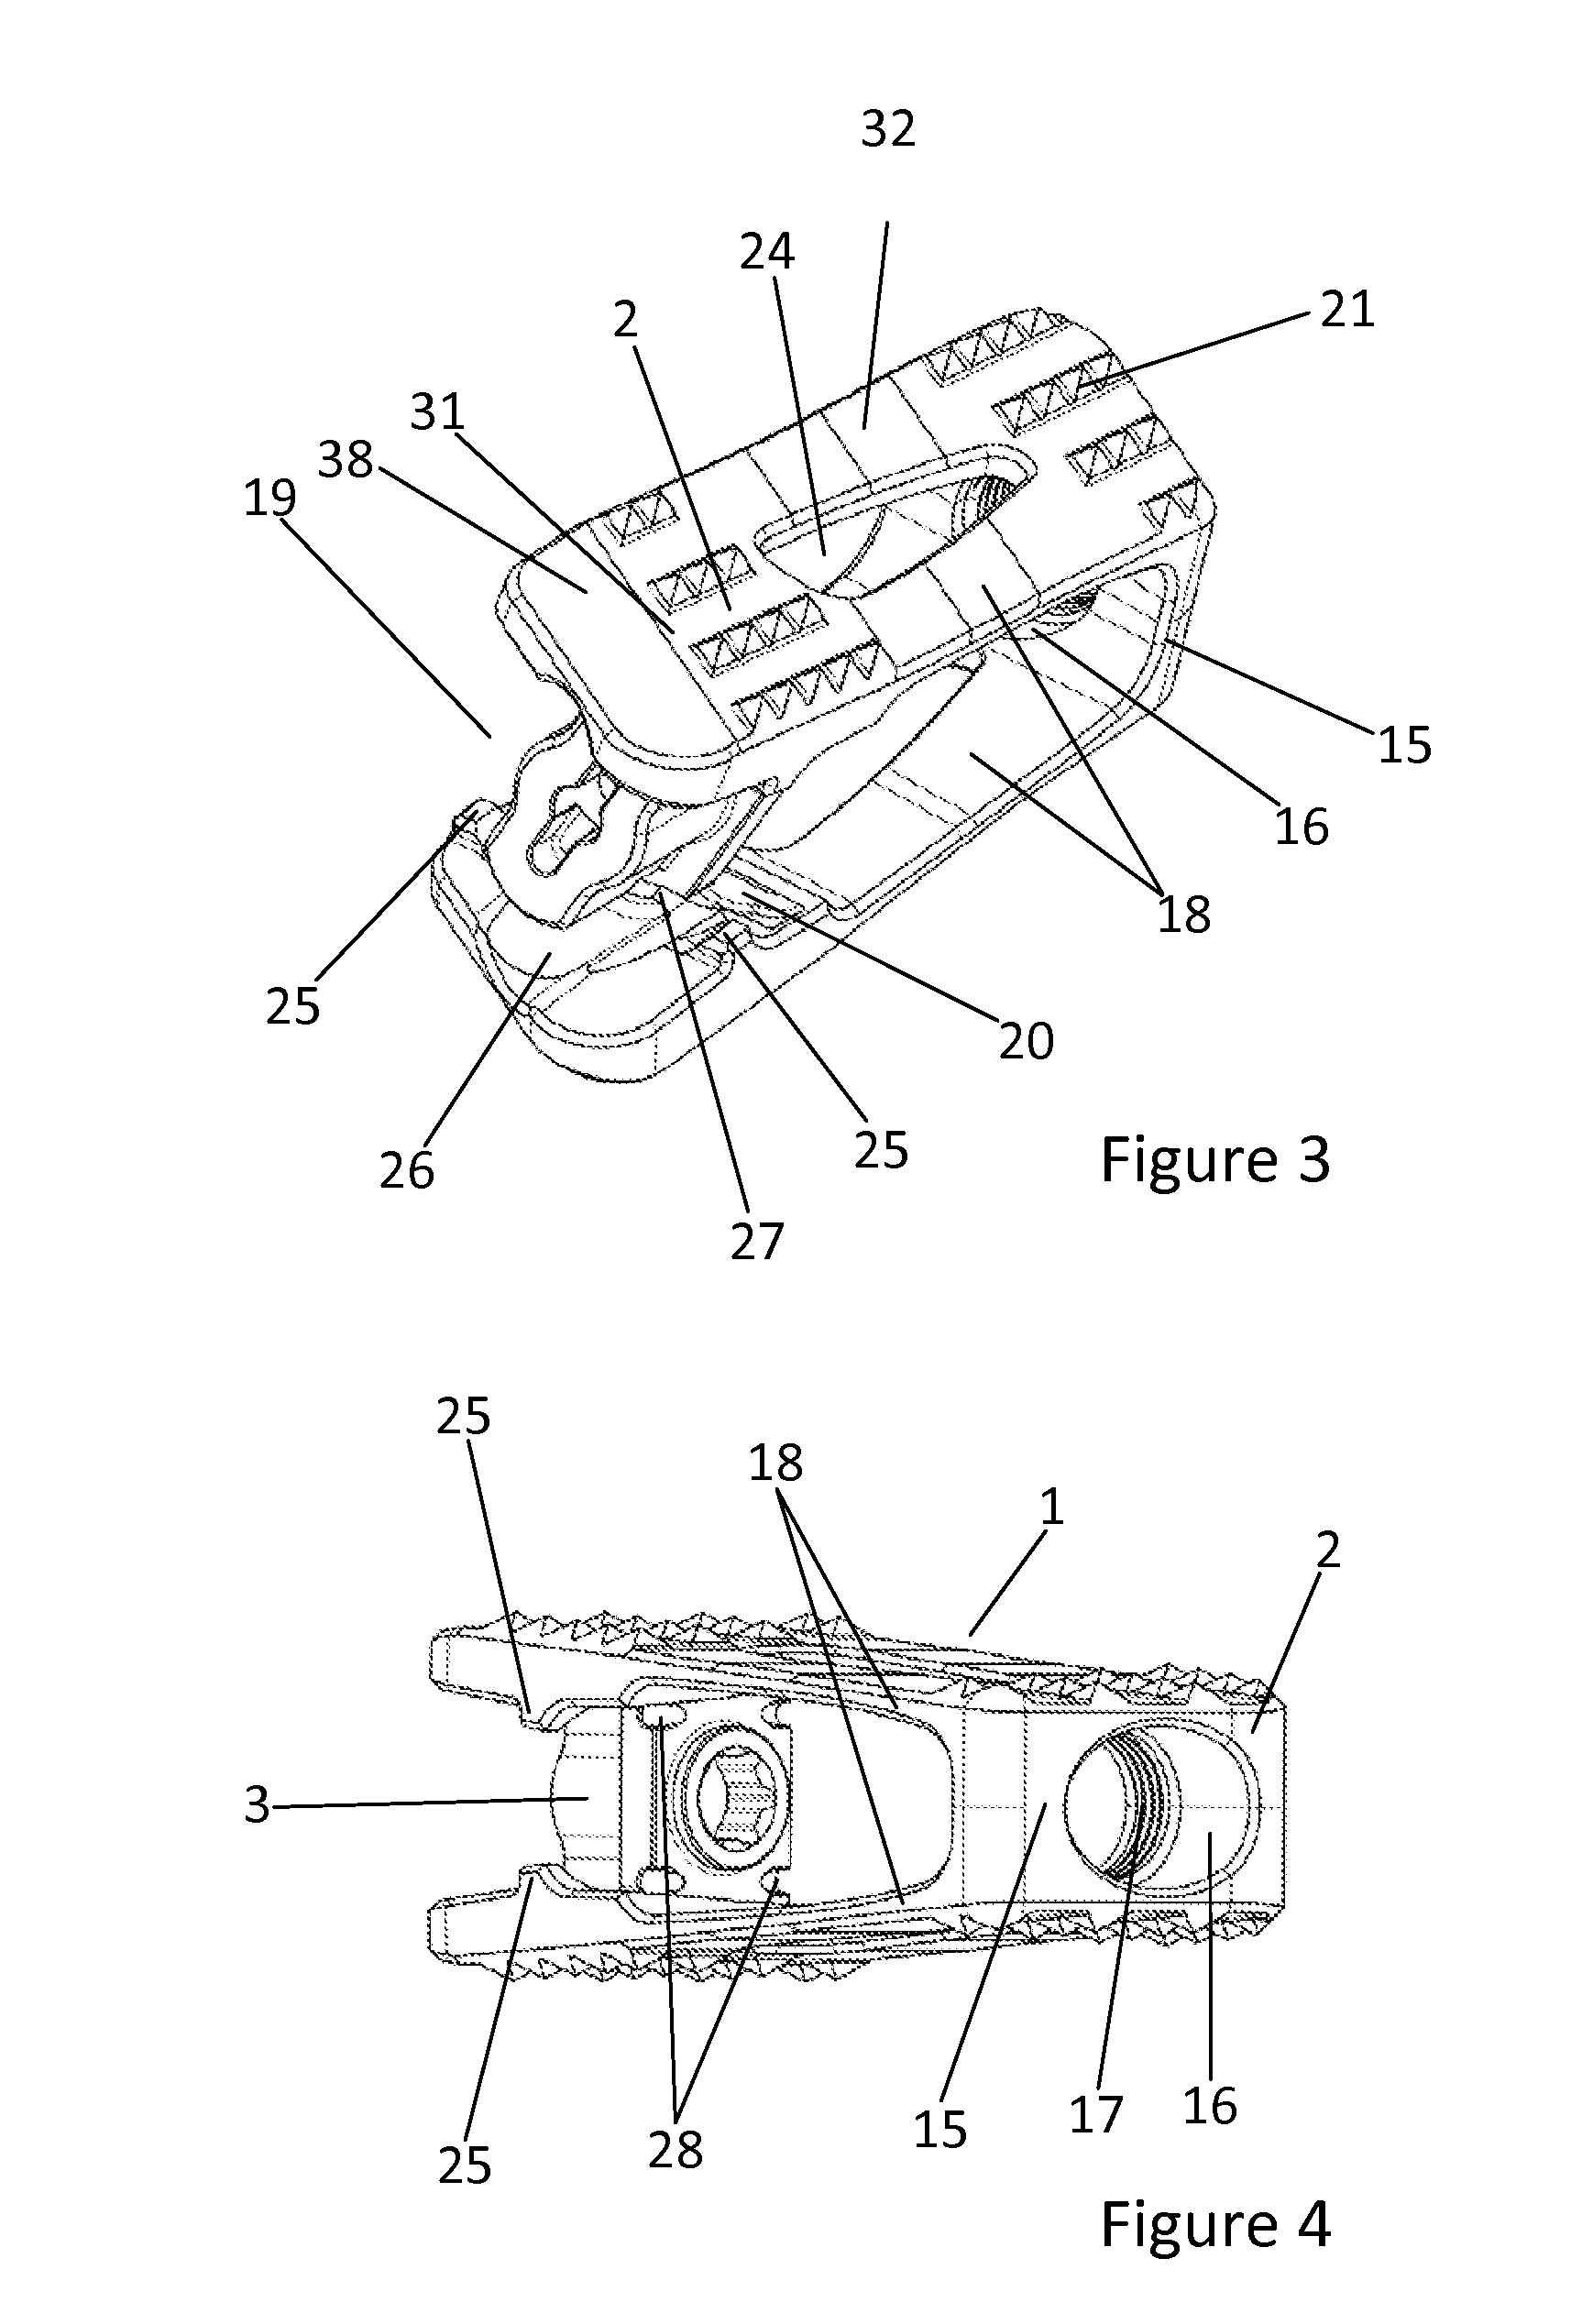 Expandable Cage for the Intercorporal Fusion of Lumbar Vertebrae